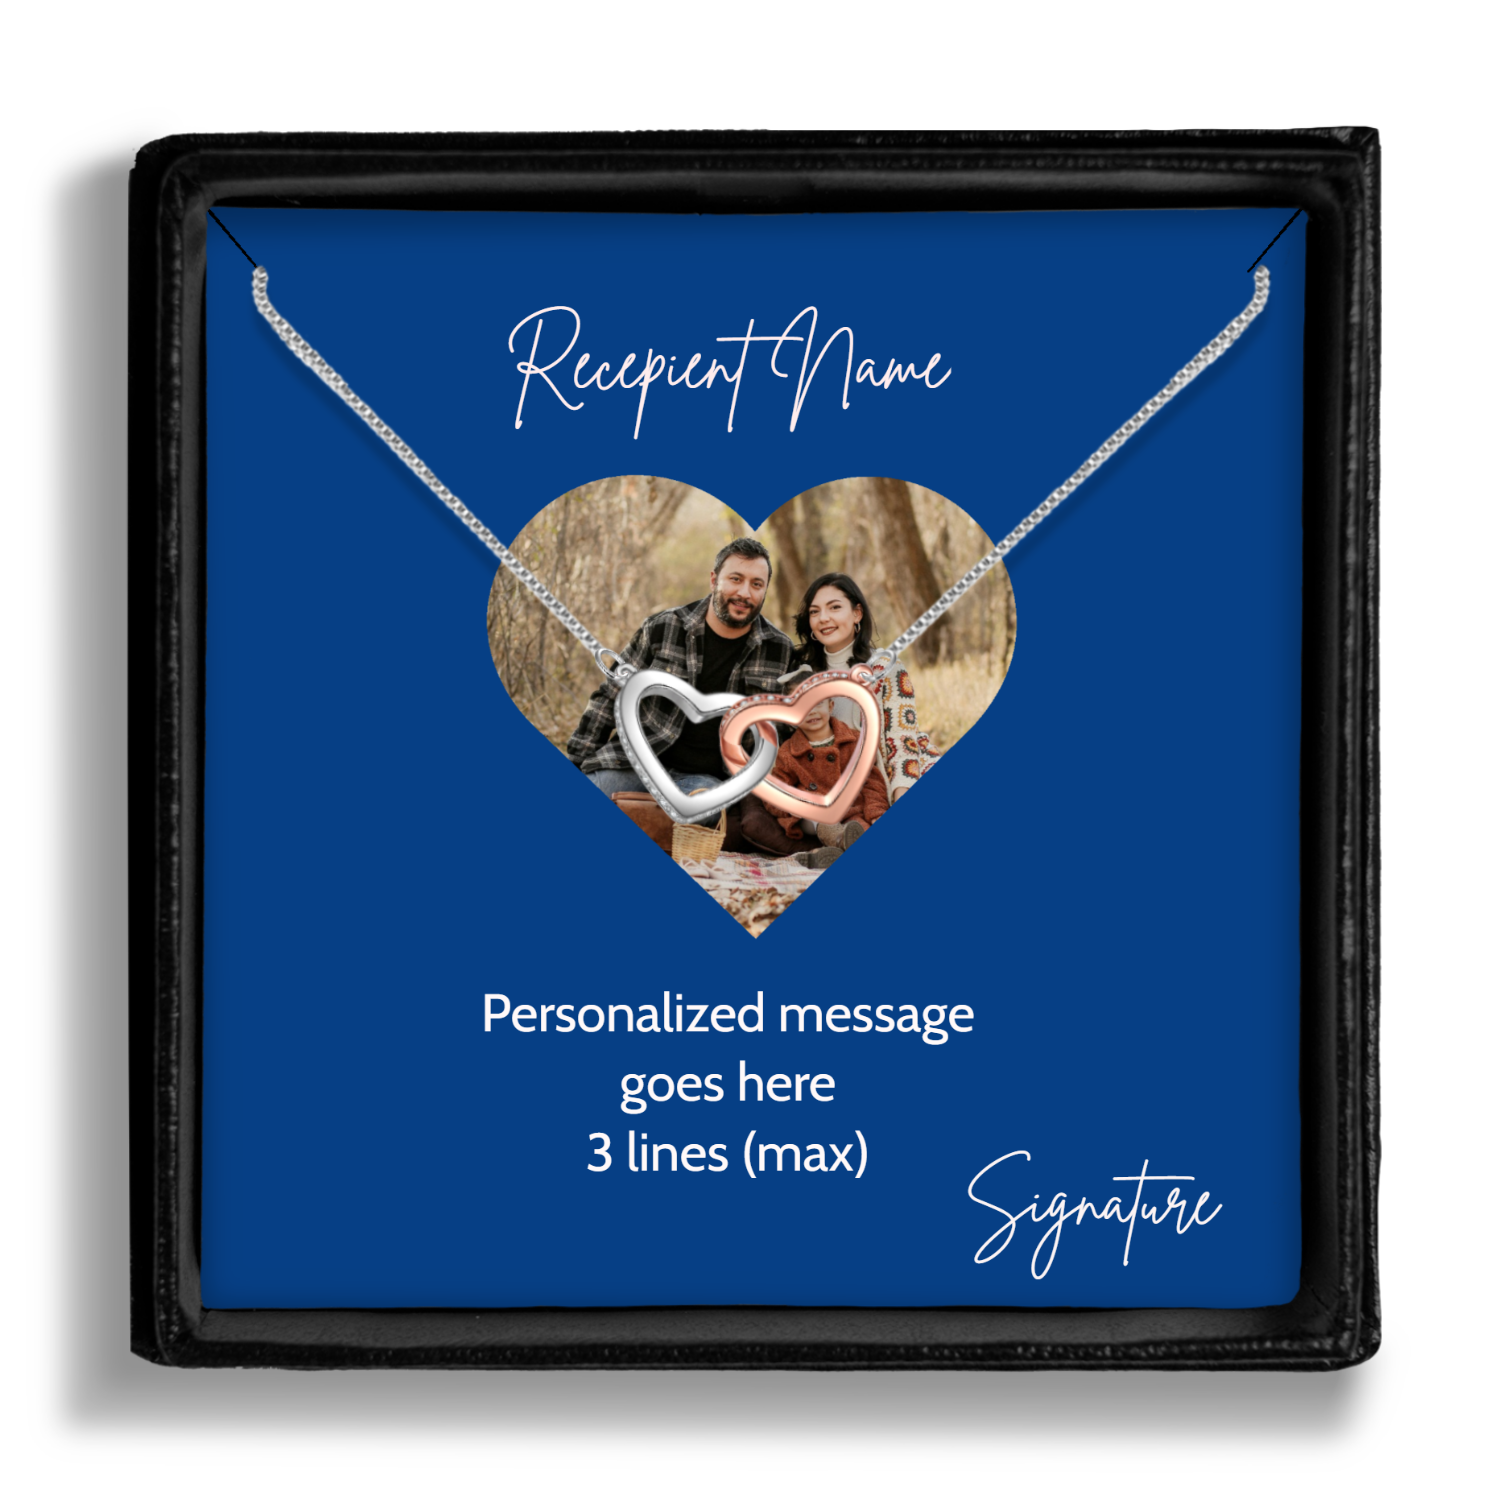 Personalized Necklaces + Message Cards - Jewelry With Personalized Heart Photo Message Card 